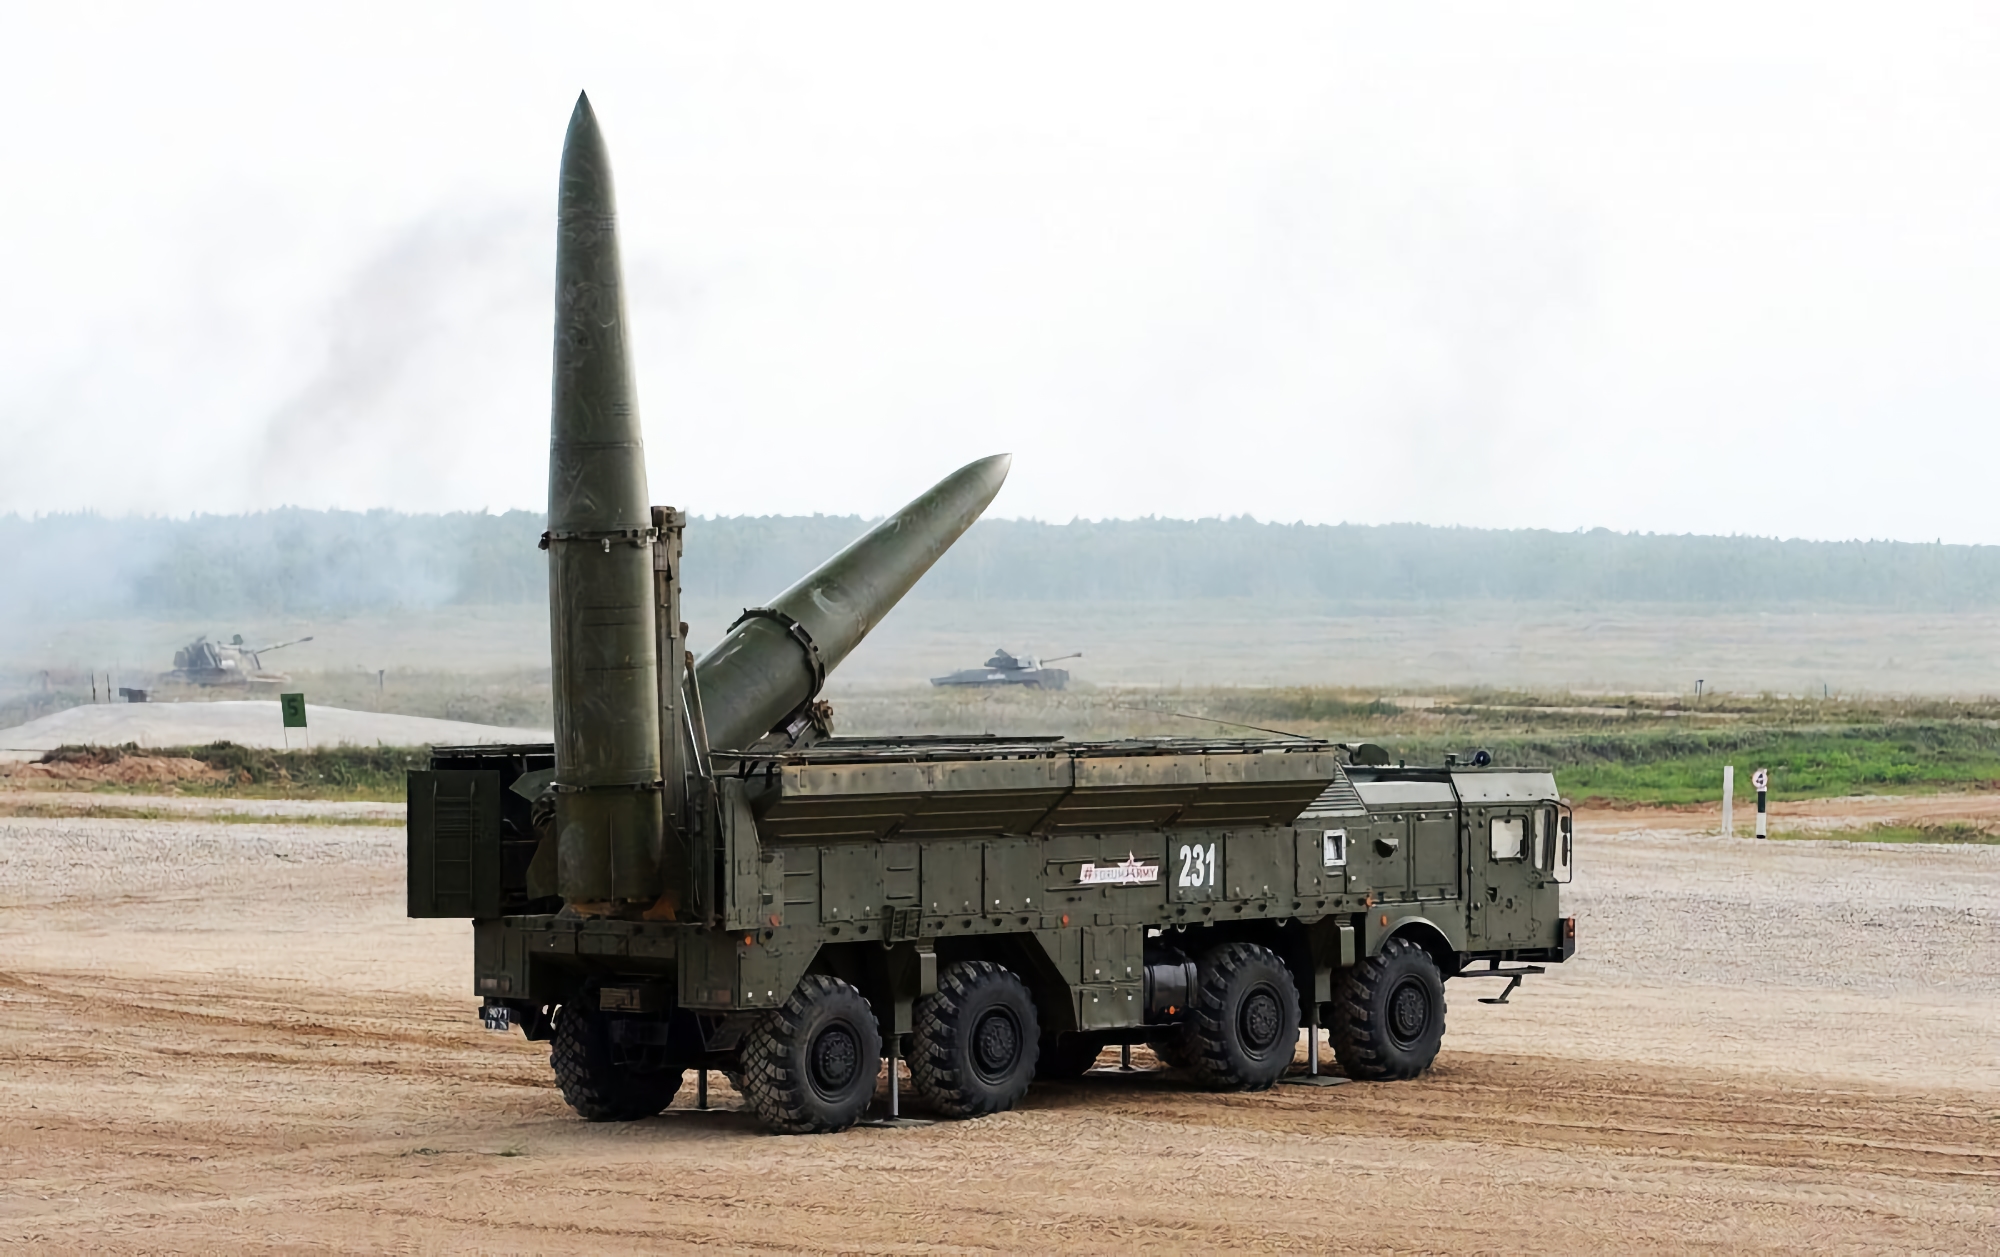 The Iskander missile launcher self-destructed in Russia without the help of the AFU